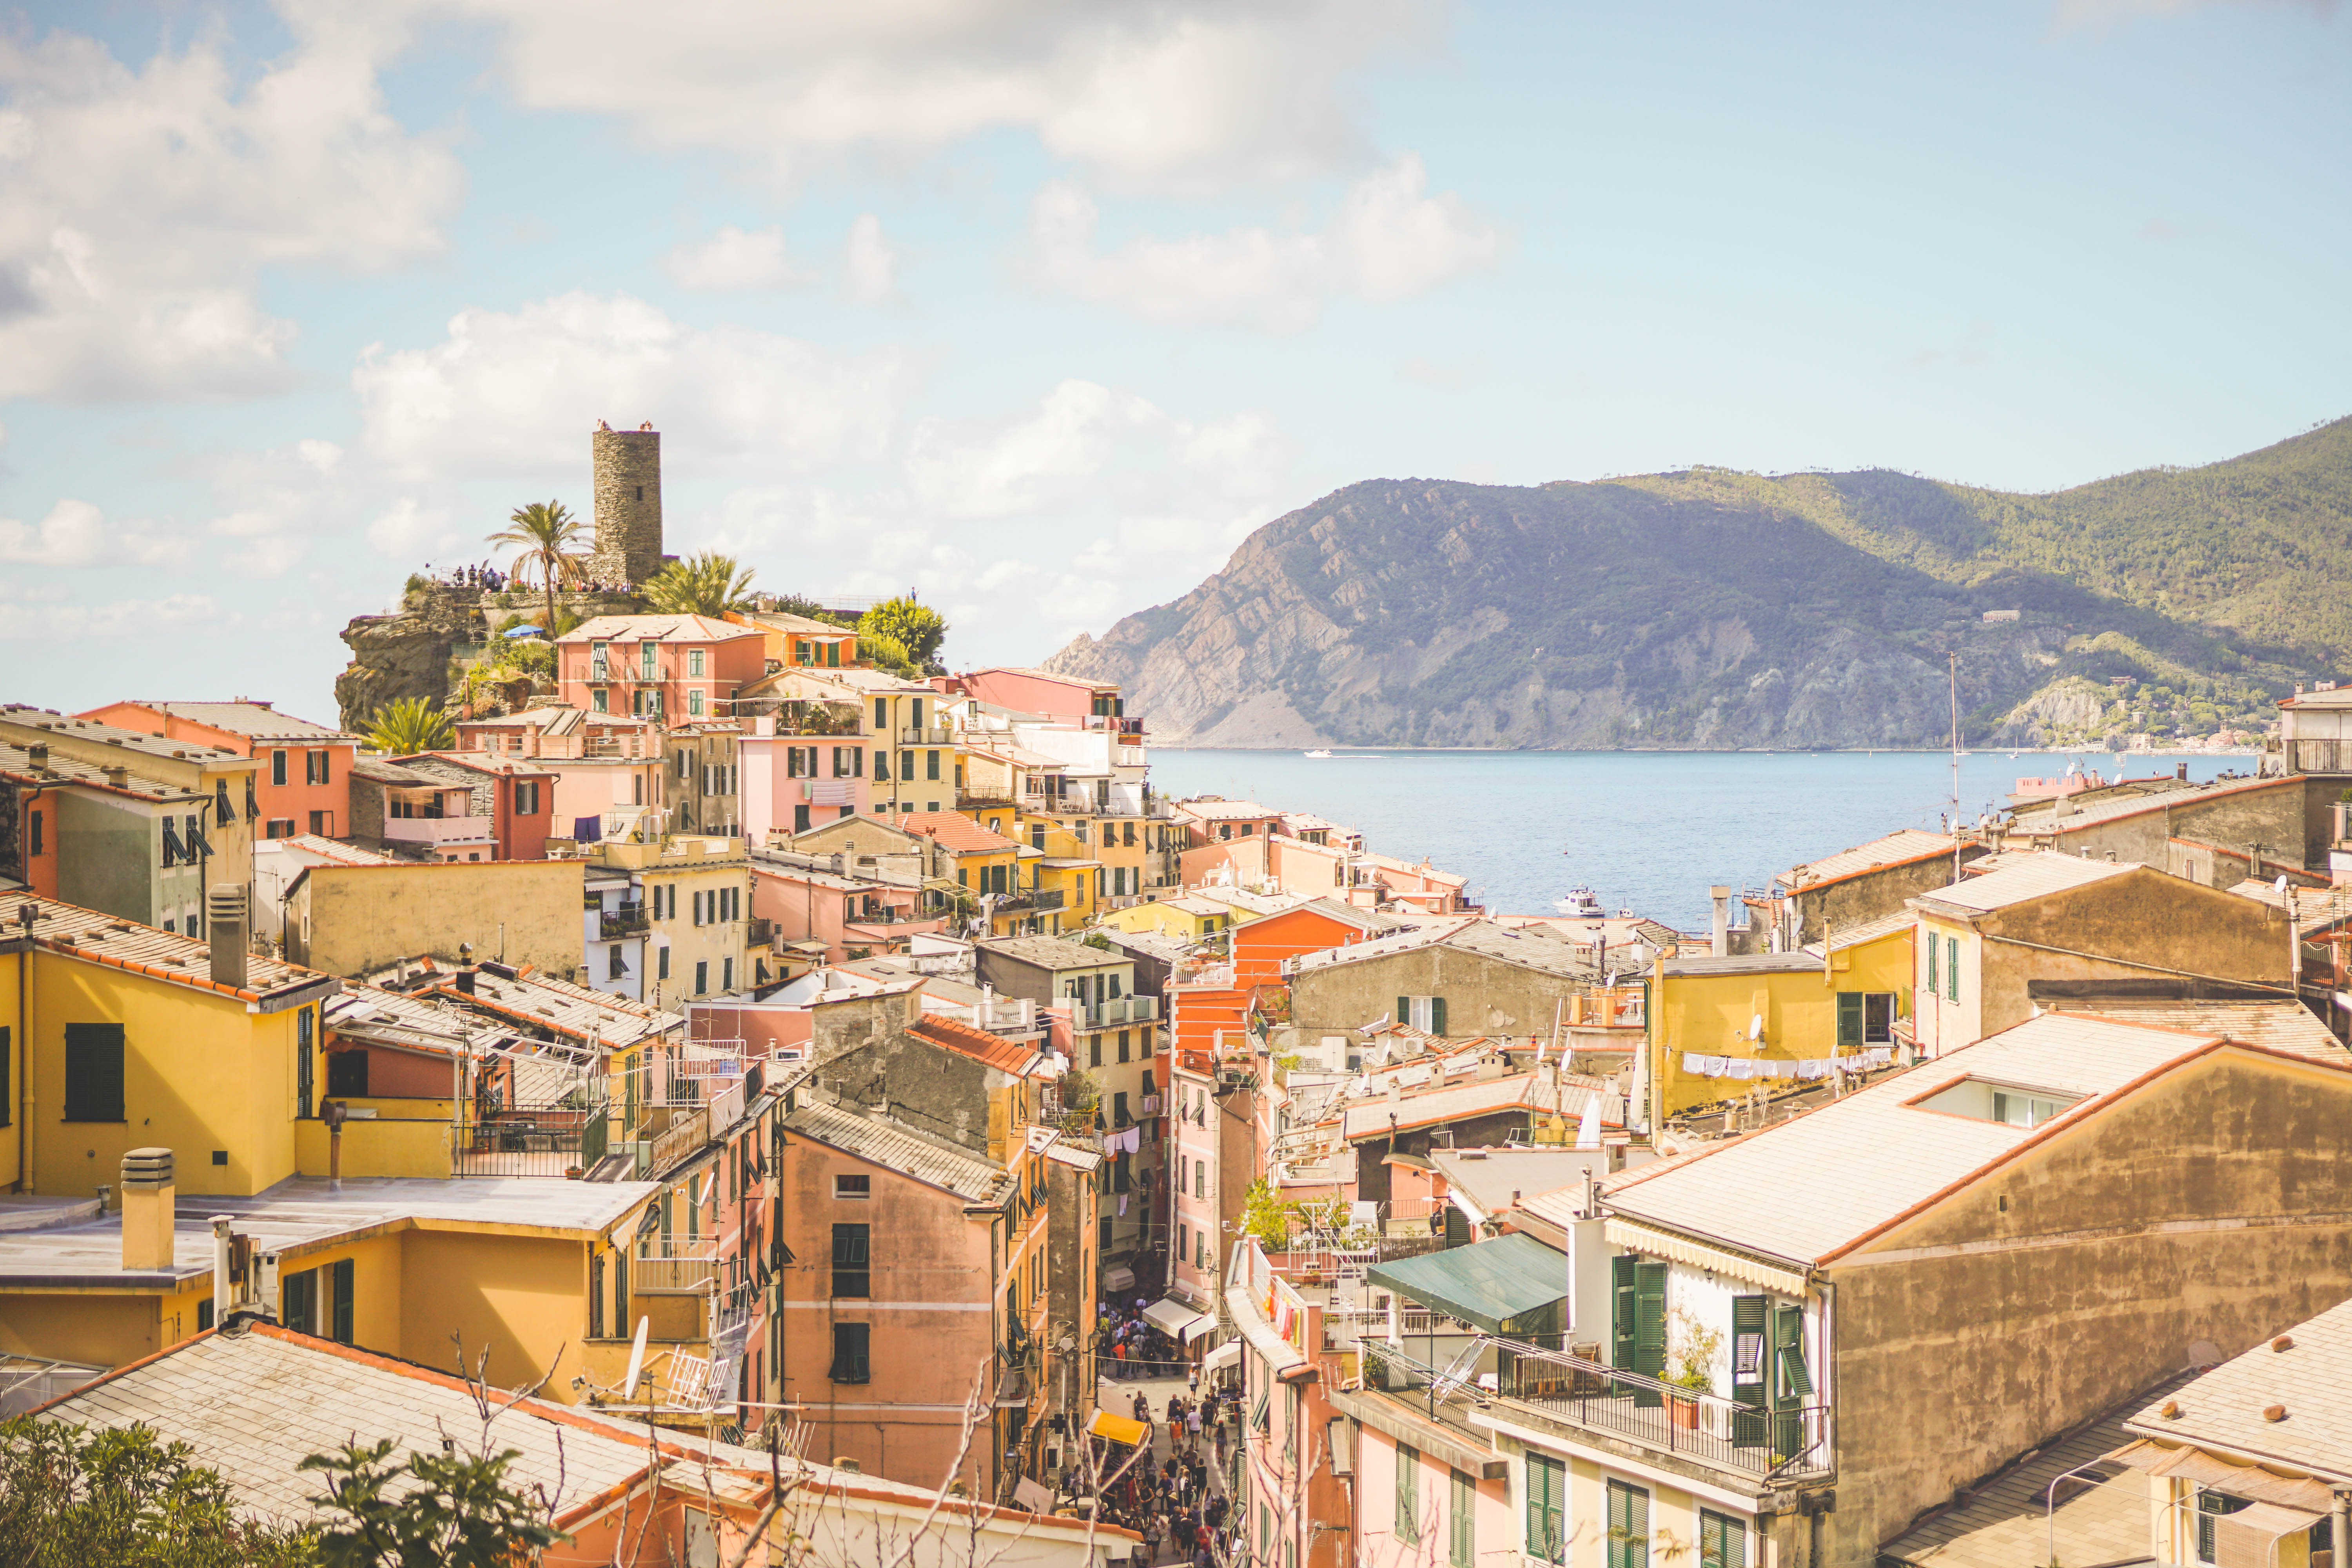 3 Days in Cinque Terre: A guide to the stunning Cinque Terre